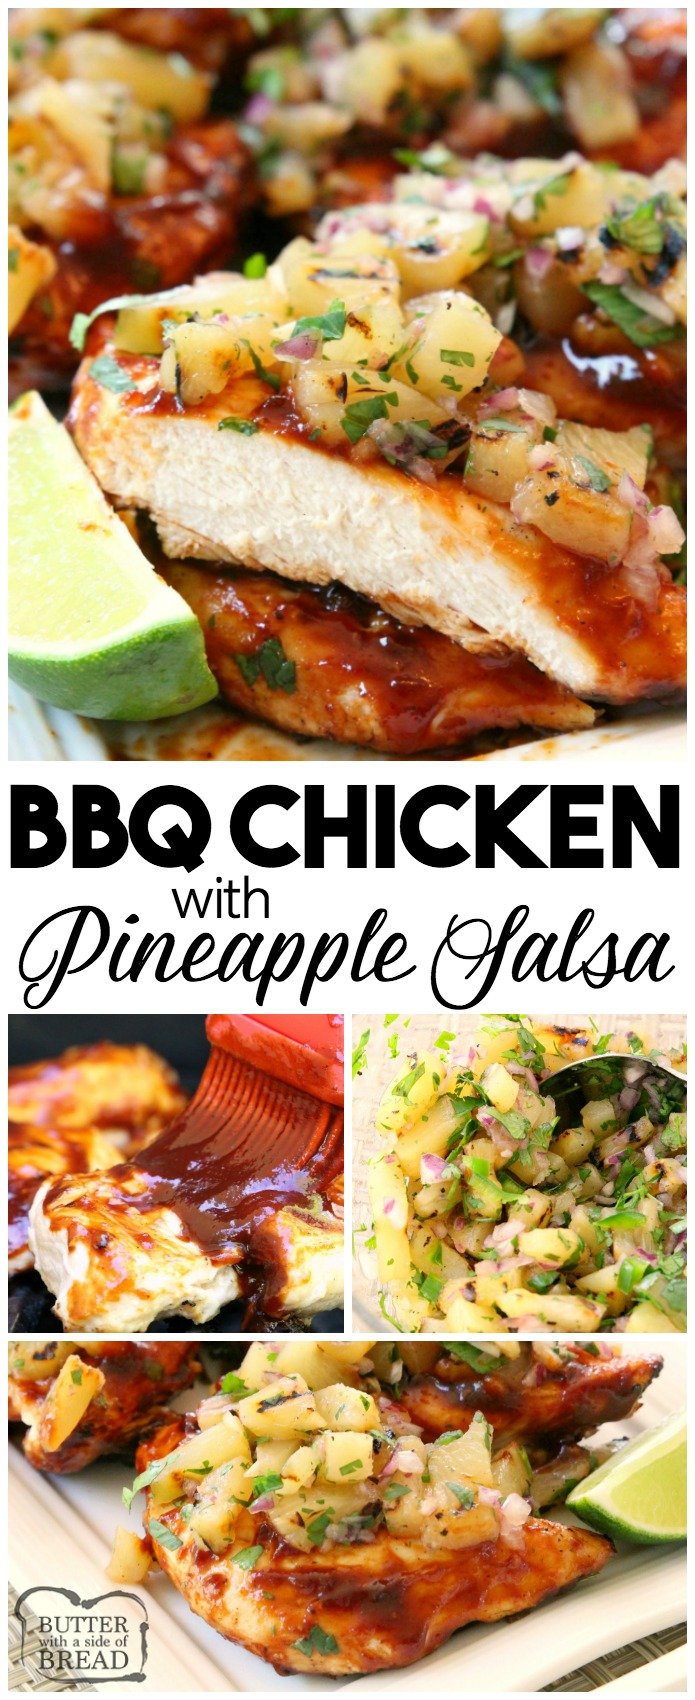 Grilled BBQ Chicken with Pineapple Salsa is made by smothering grilled chicken with thick & flavorful bbq sauce then topping it with a delicious pineapple salsa. Perfect for weeknight dinners or weekend get-togethers, the pineapple salsa pairs perfectly with the tangy grilled barbecue chicken. #Grill #Chicken #bbq #recipe from Butter With A Side of Bread #pineapple #salsa #grilling #barbecue